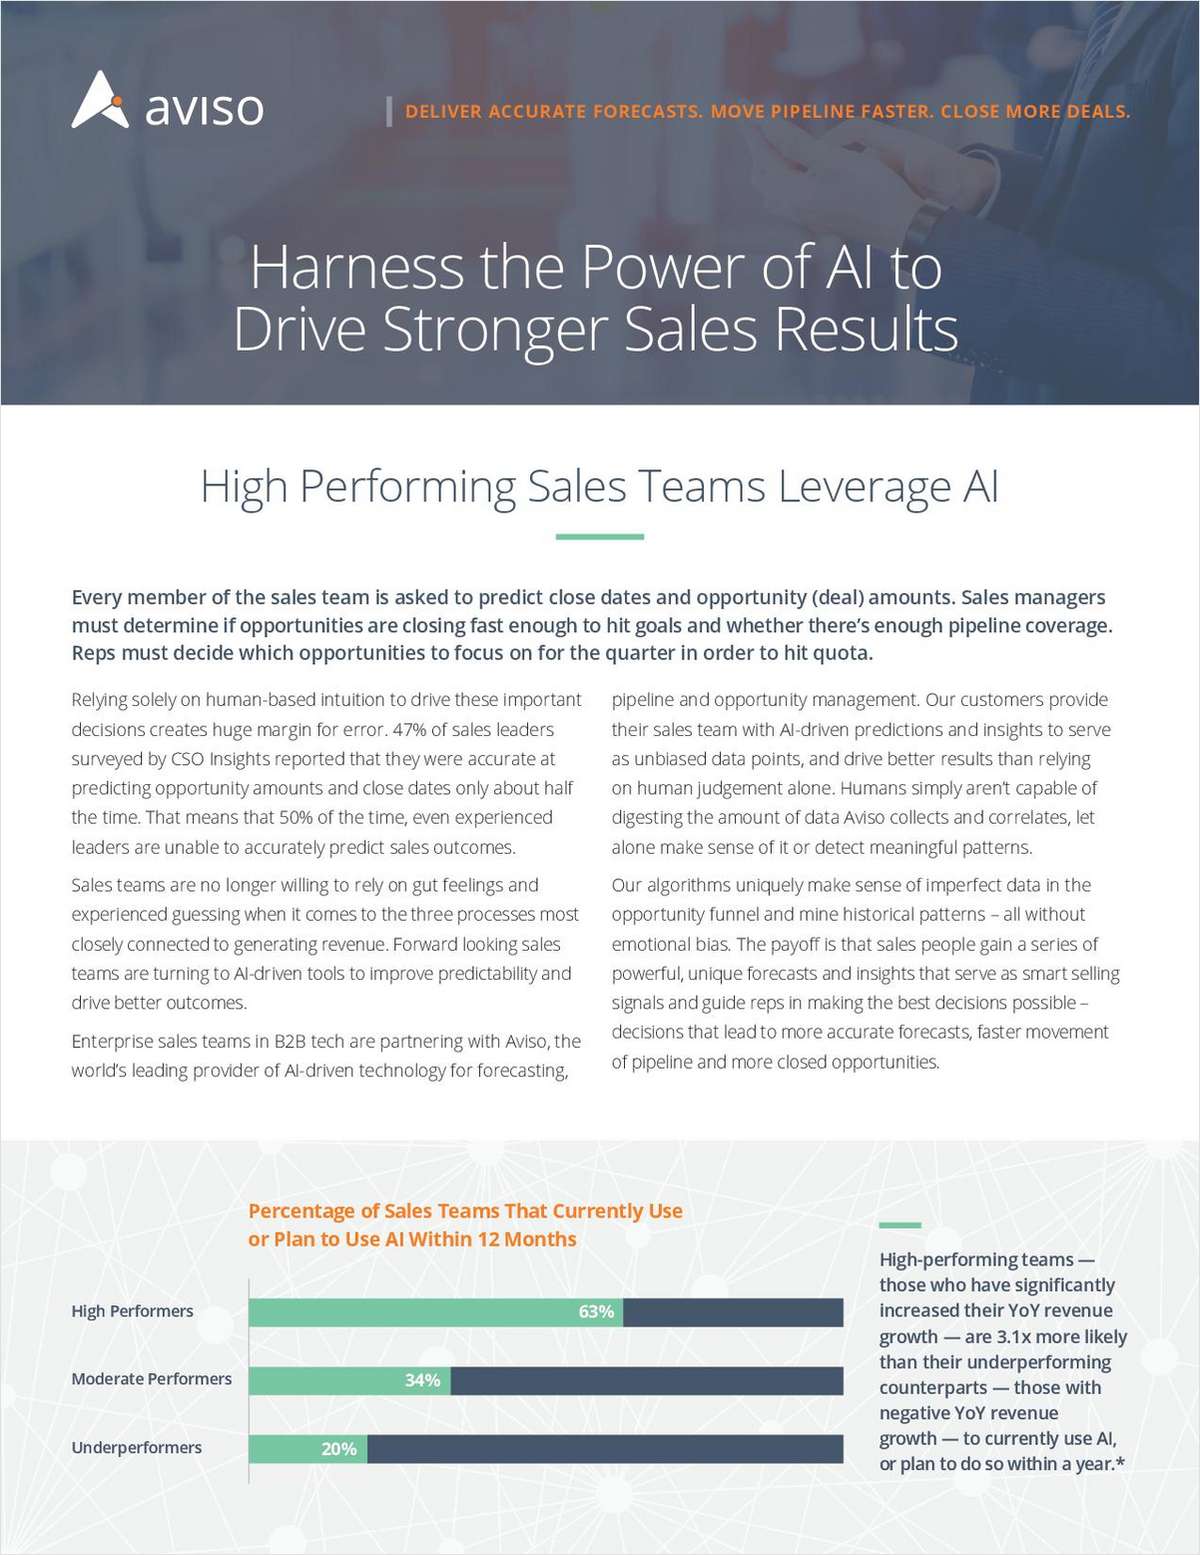 Harness the Power of AI to Drive Stronger Sales Results